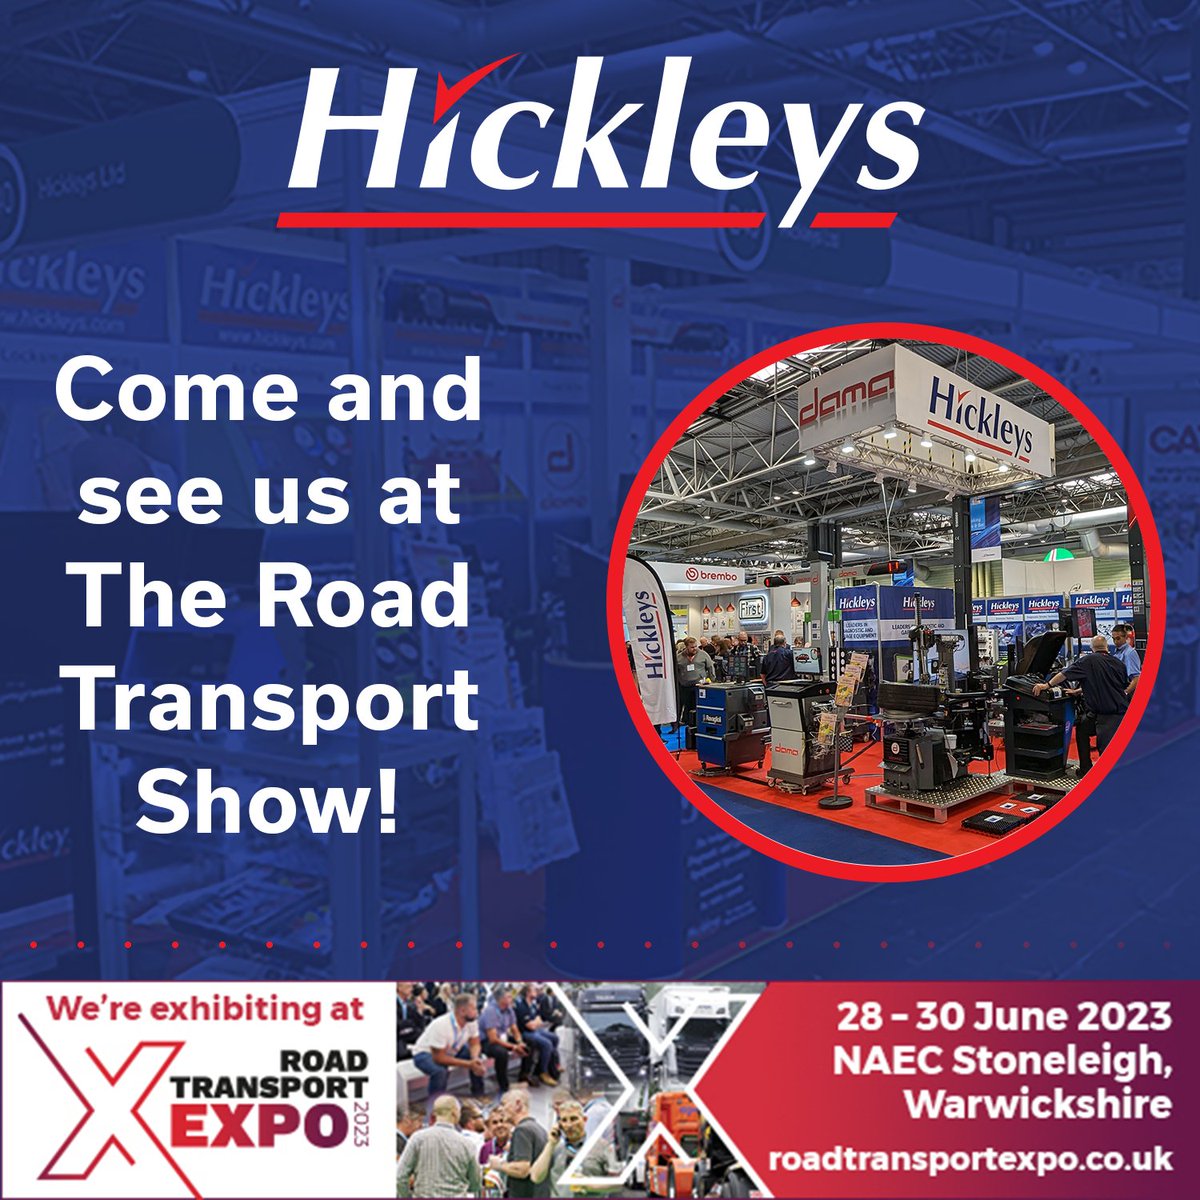 Show season is in full swing! Next up is the Road Transport Expo in Stoneleigh where we will be exhibiting our diagnostic and garage equipment. You will find us on stand G3.

@RTXPO_ #Showtime #GarageEquipment